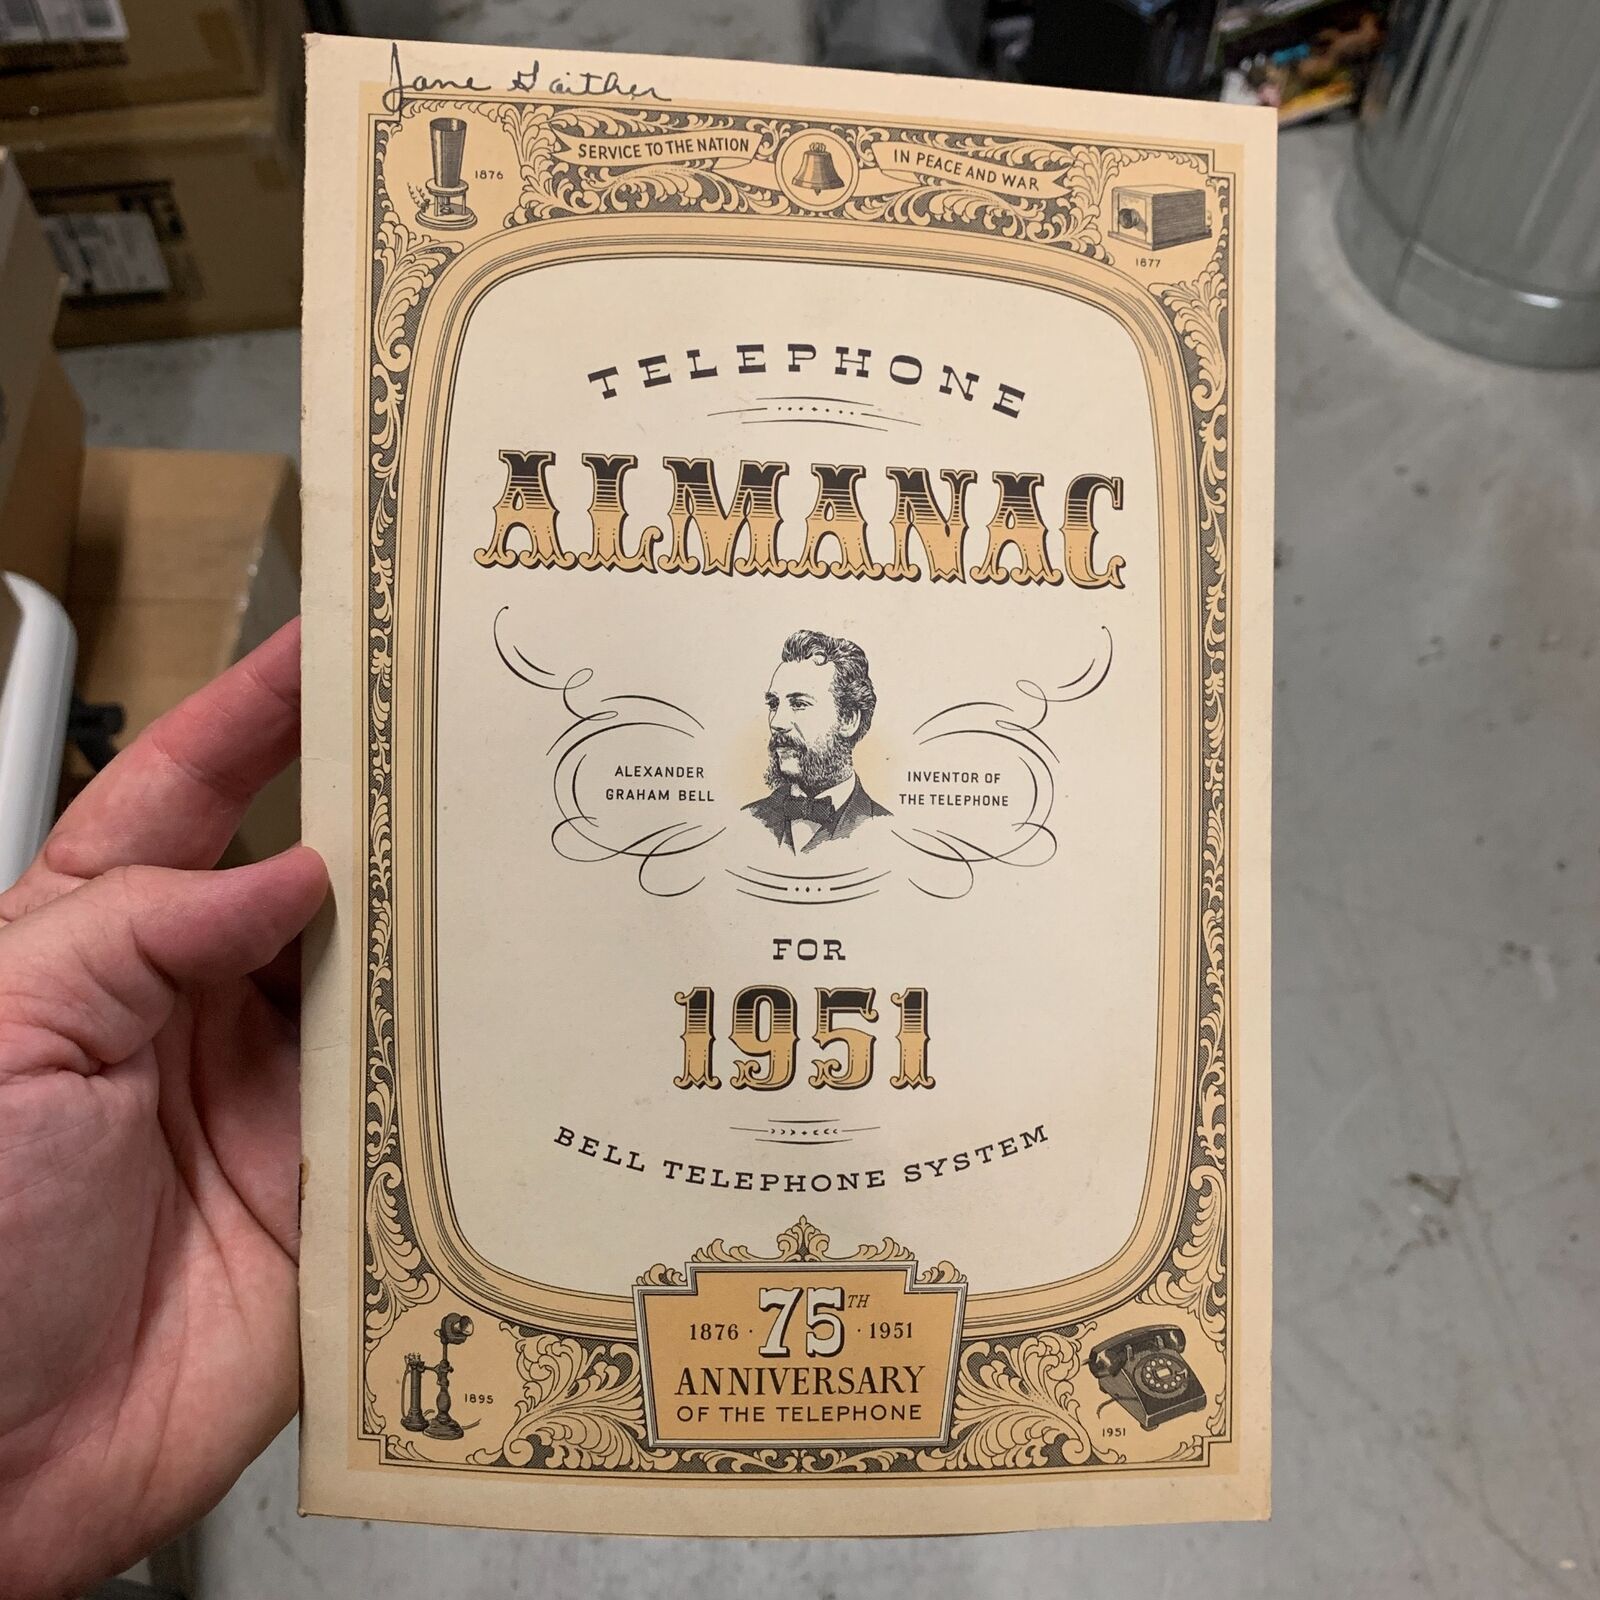 Vintage c.1950s Telephone Almanac - Bell Telephone Systems 75th Anniversary 1951